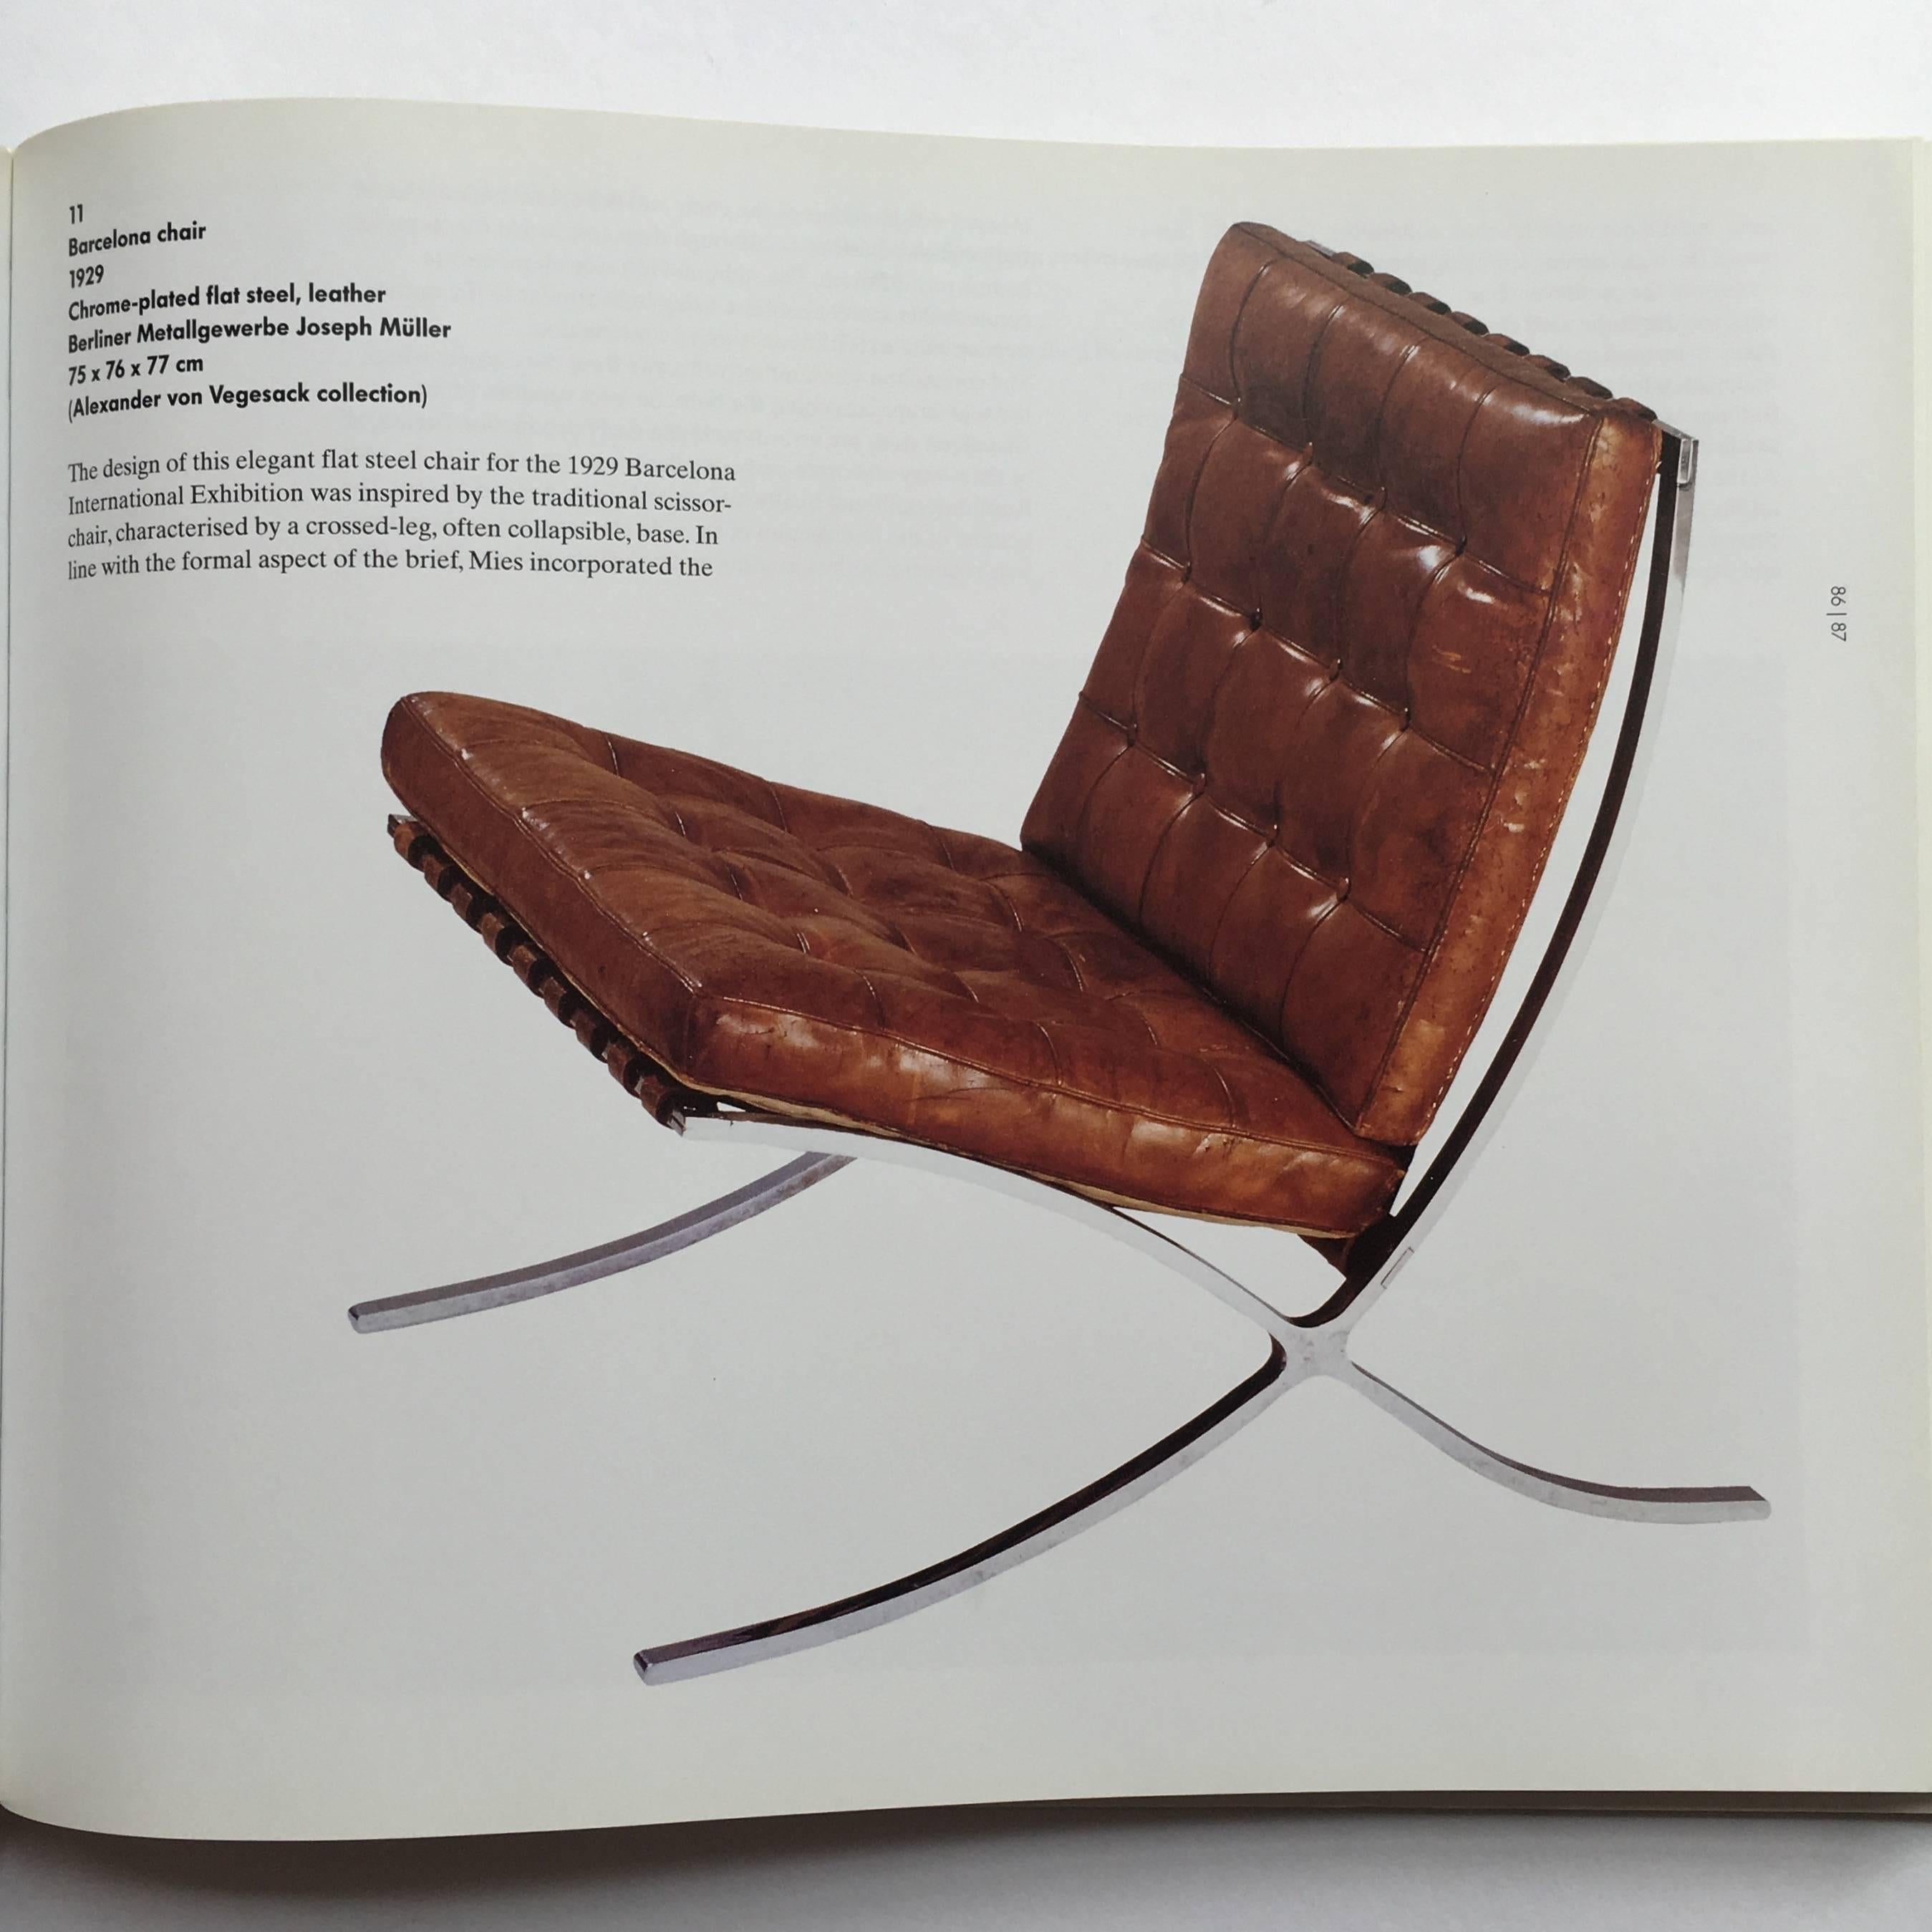 First edition, published by Vitra Design Museum/Skira, Germany/Italy, 1998.

Originally published for an exhibition at the Vitra Design Museum, this book presents the works of Mies van der Rohe, from his metal furniture, to work at Thonet and